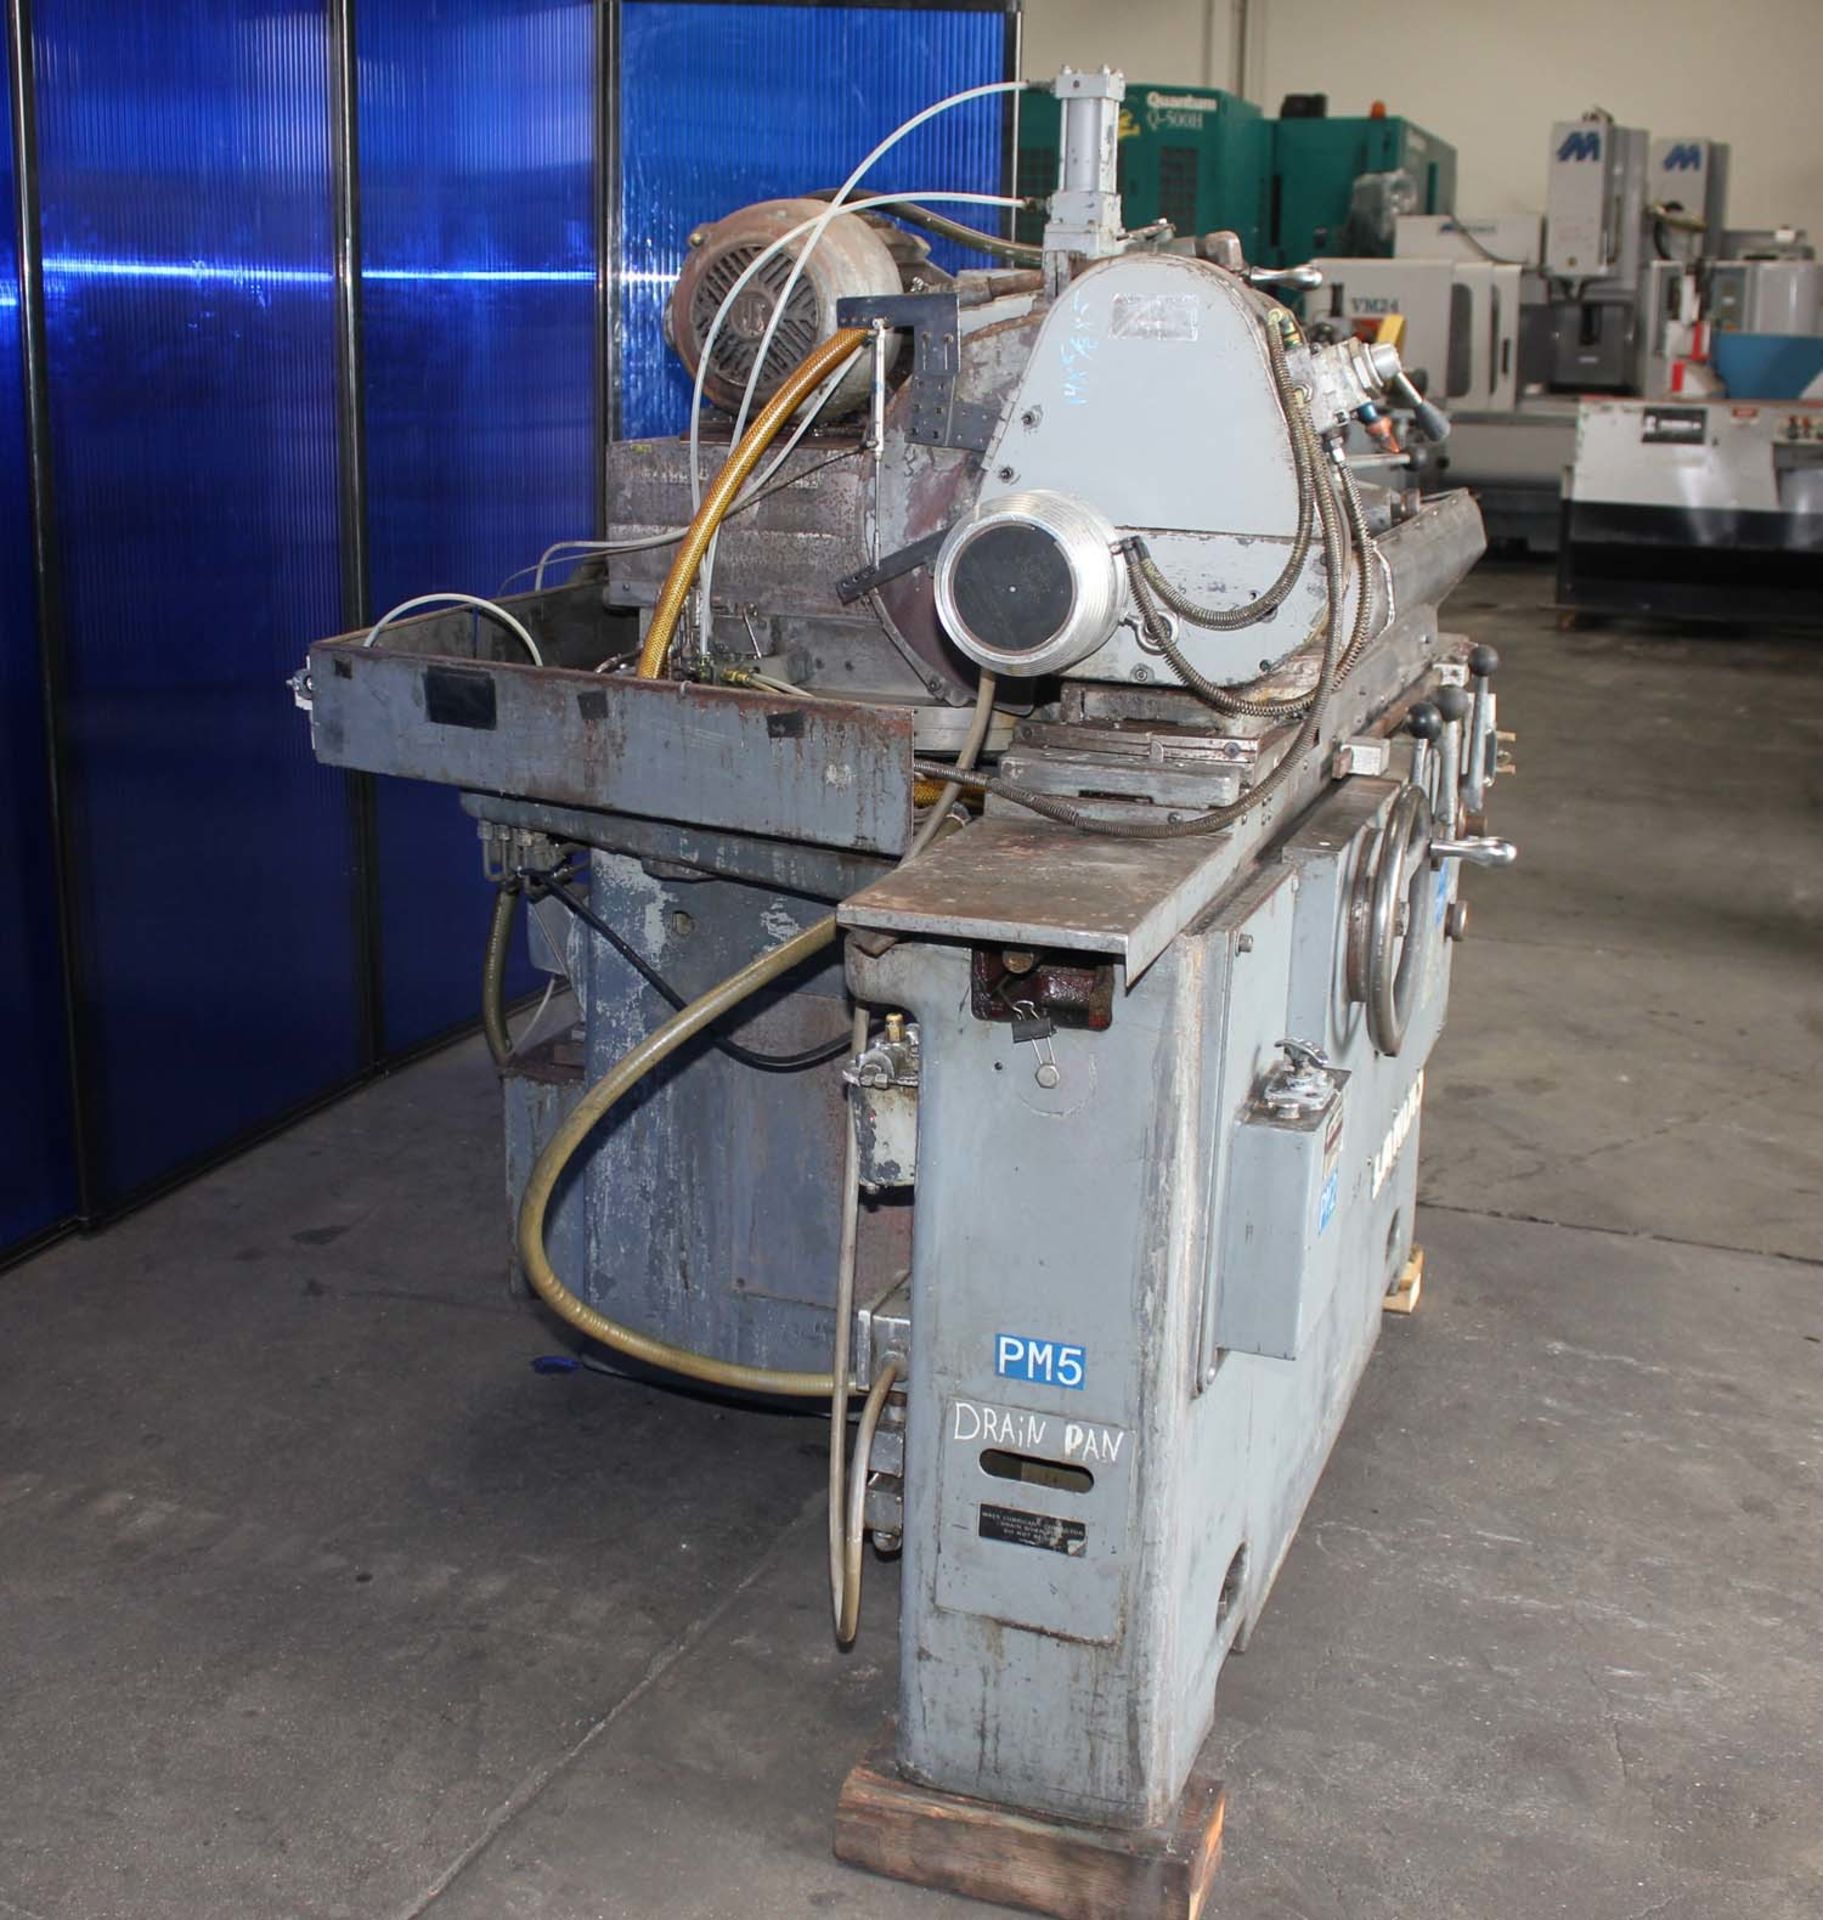 10" Swing x 20" Center Landis 1R Universal Cylindrical OD Grinder - Located In: Huntington Park, - Image 11 of 17